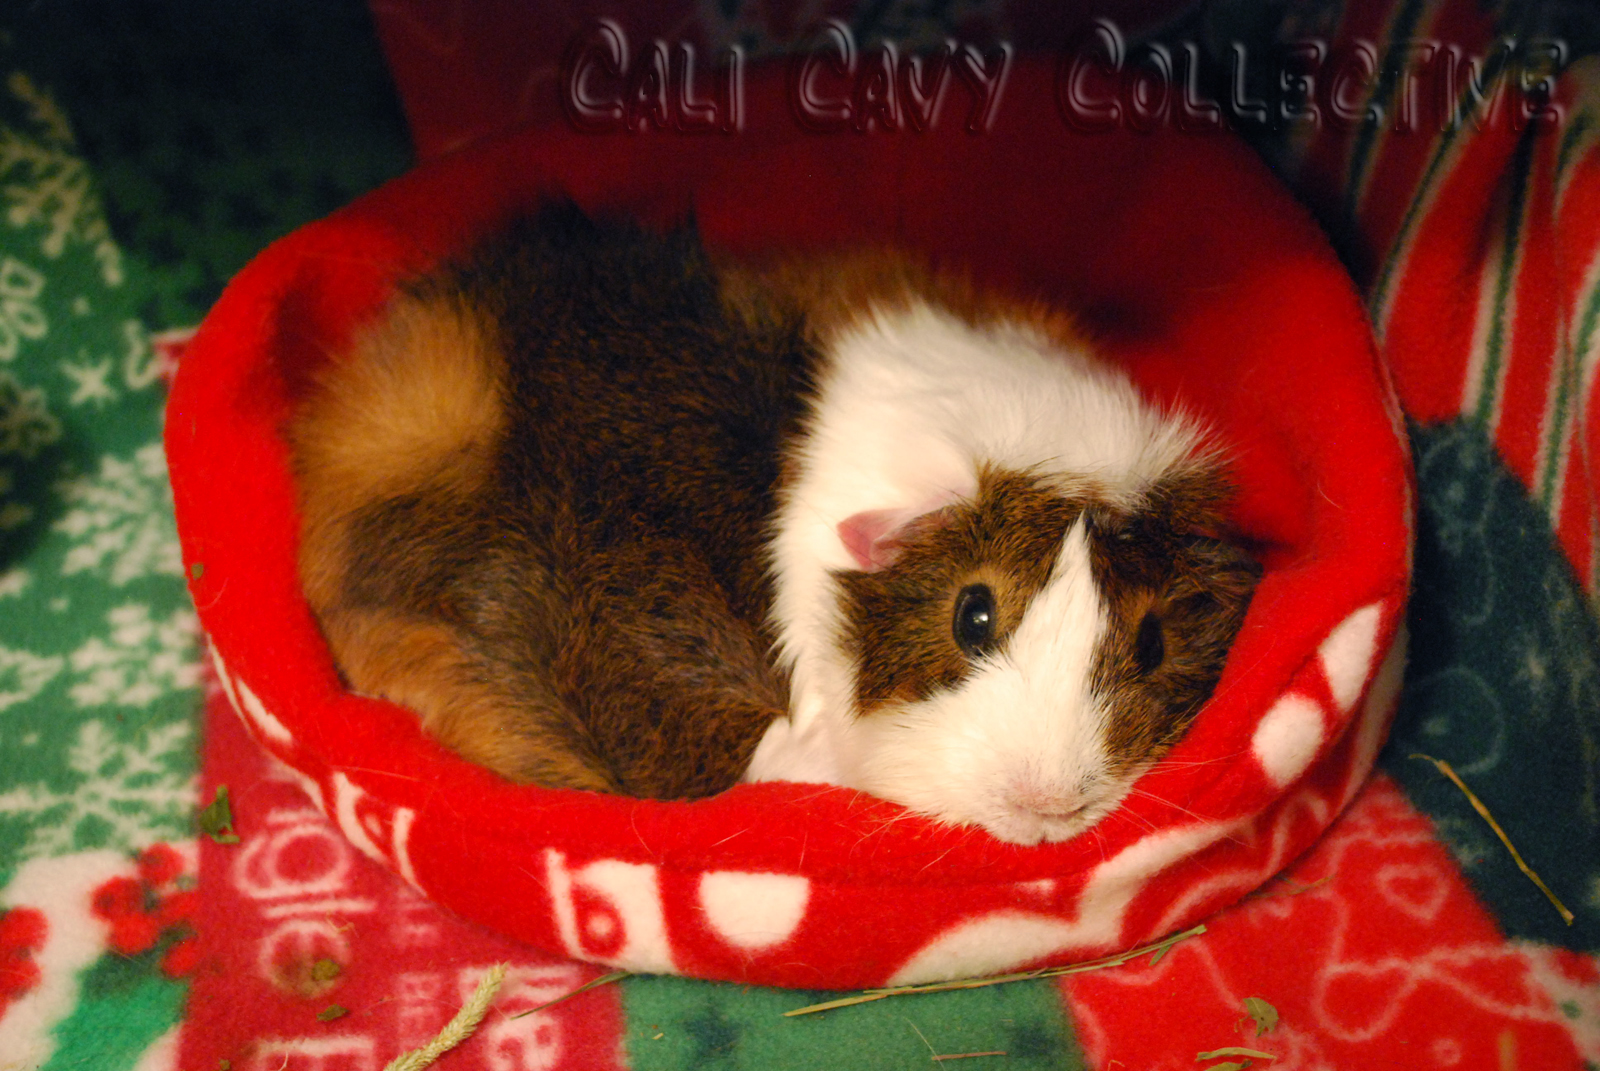 Cali Cavy Collective a blog about all things guinea pig